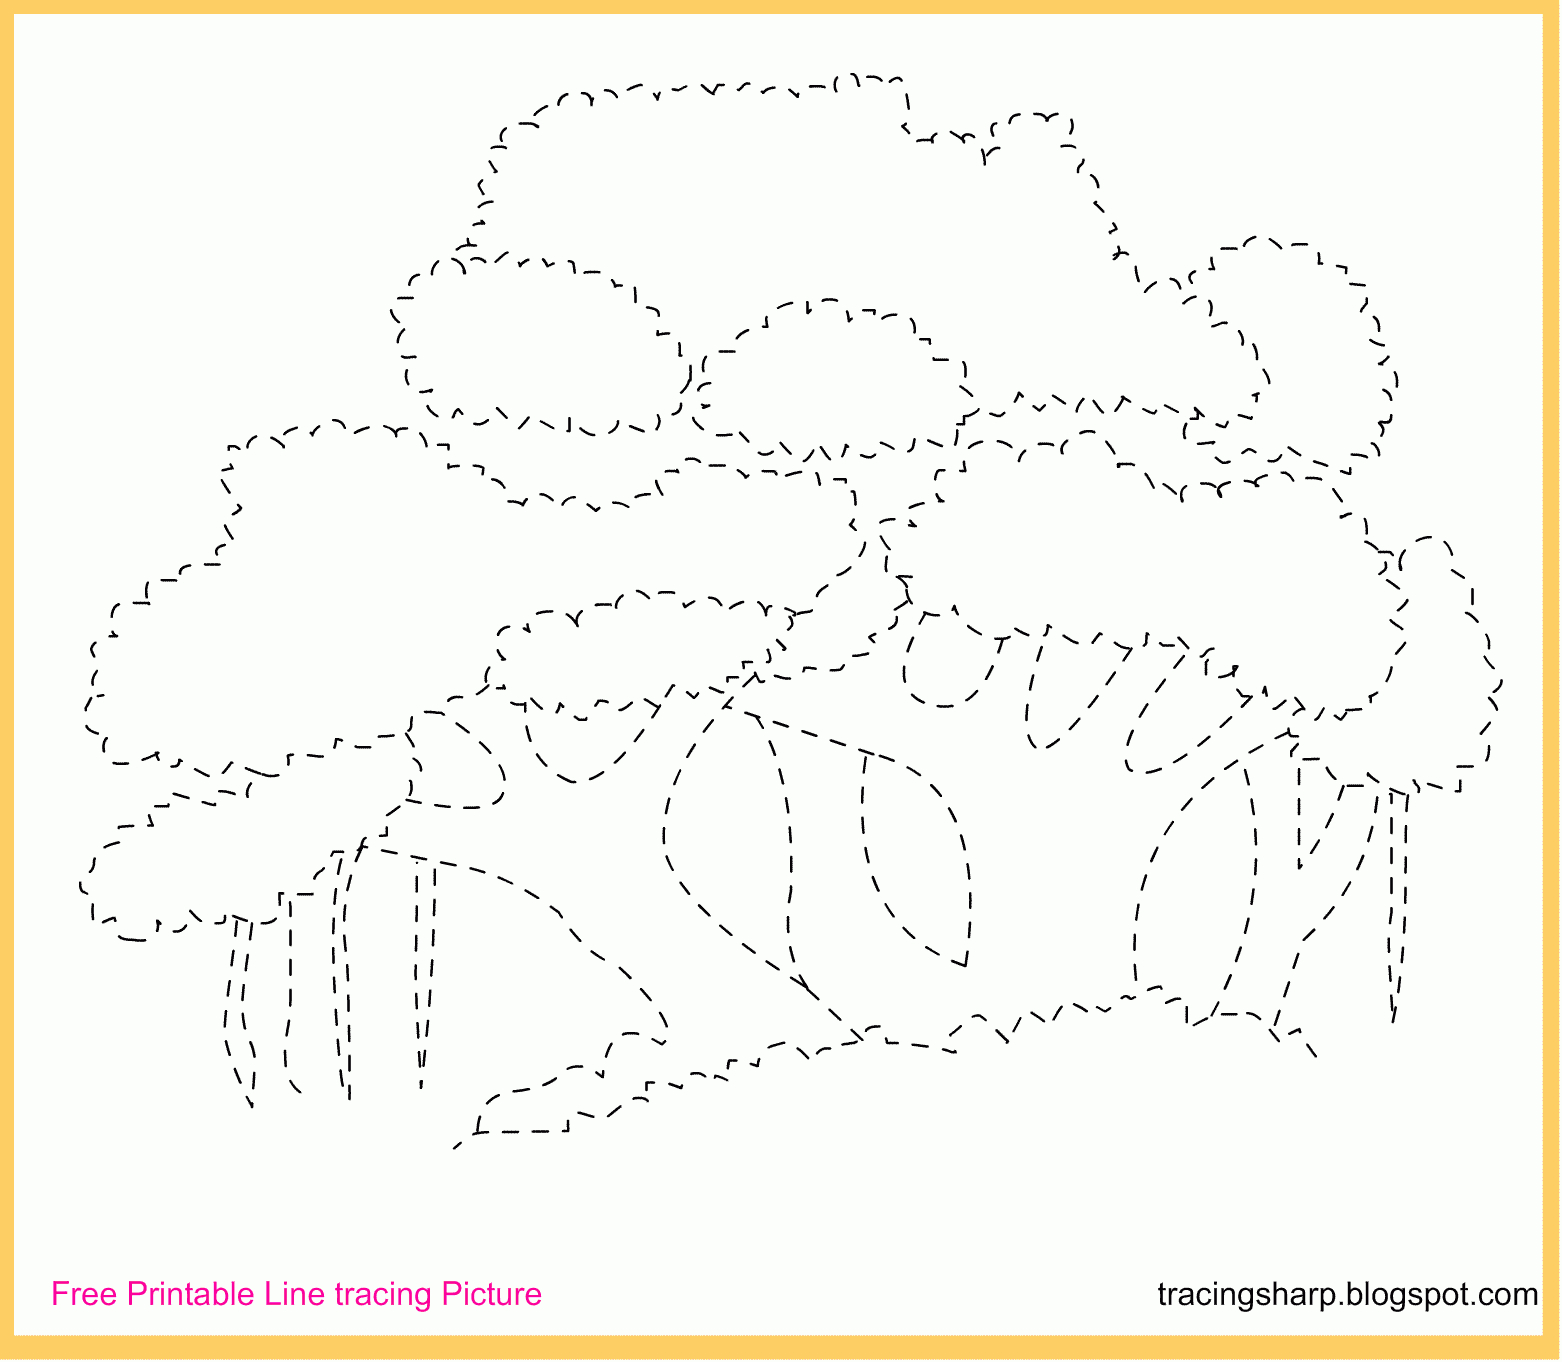 Free Tracing Line Printable: Banyan Tree Tracing Picture - Free Printable Preschool Worksheets Tracing Lines